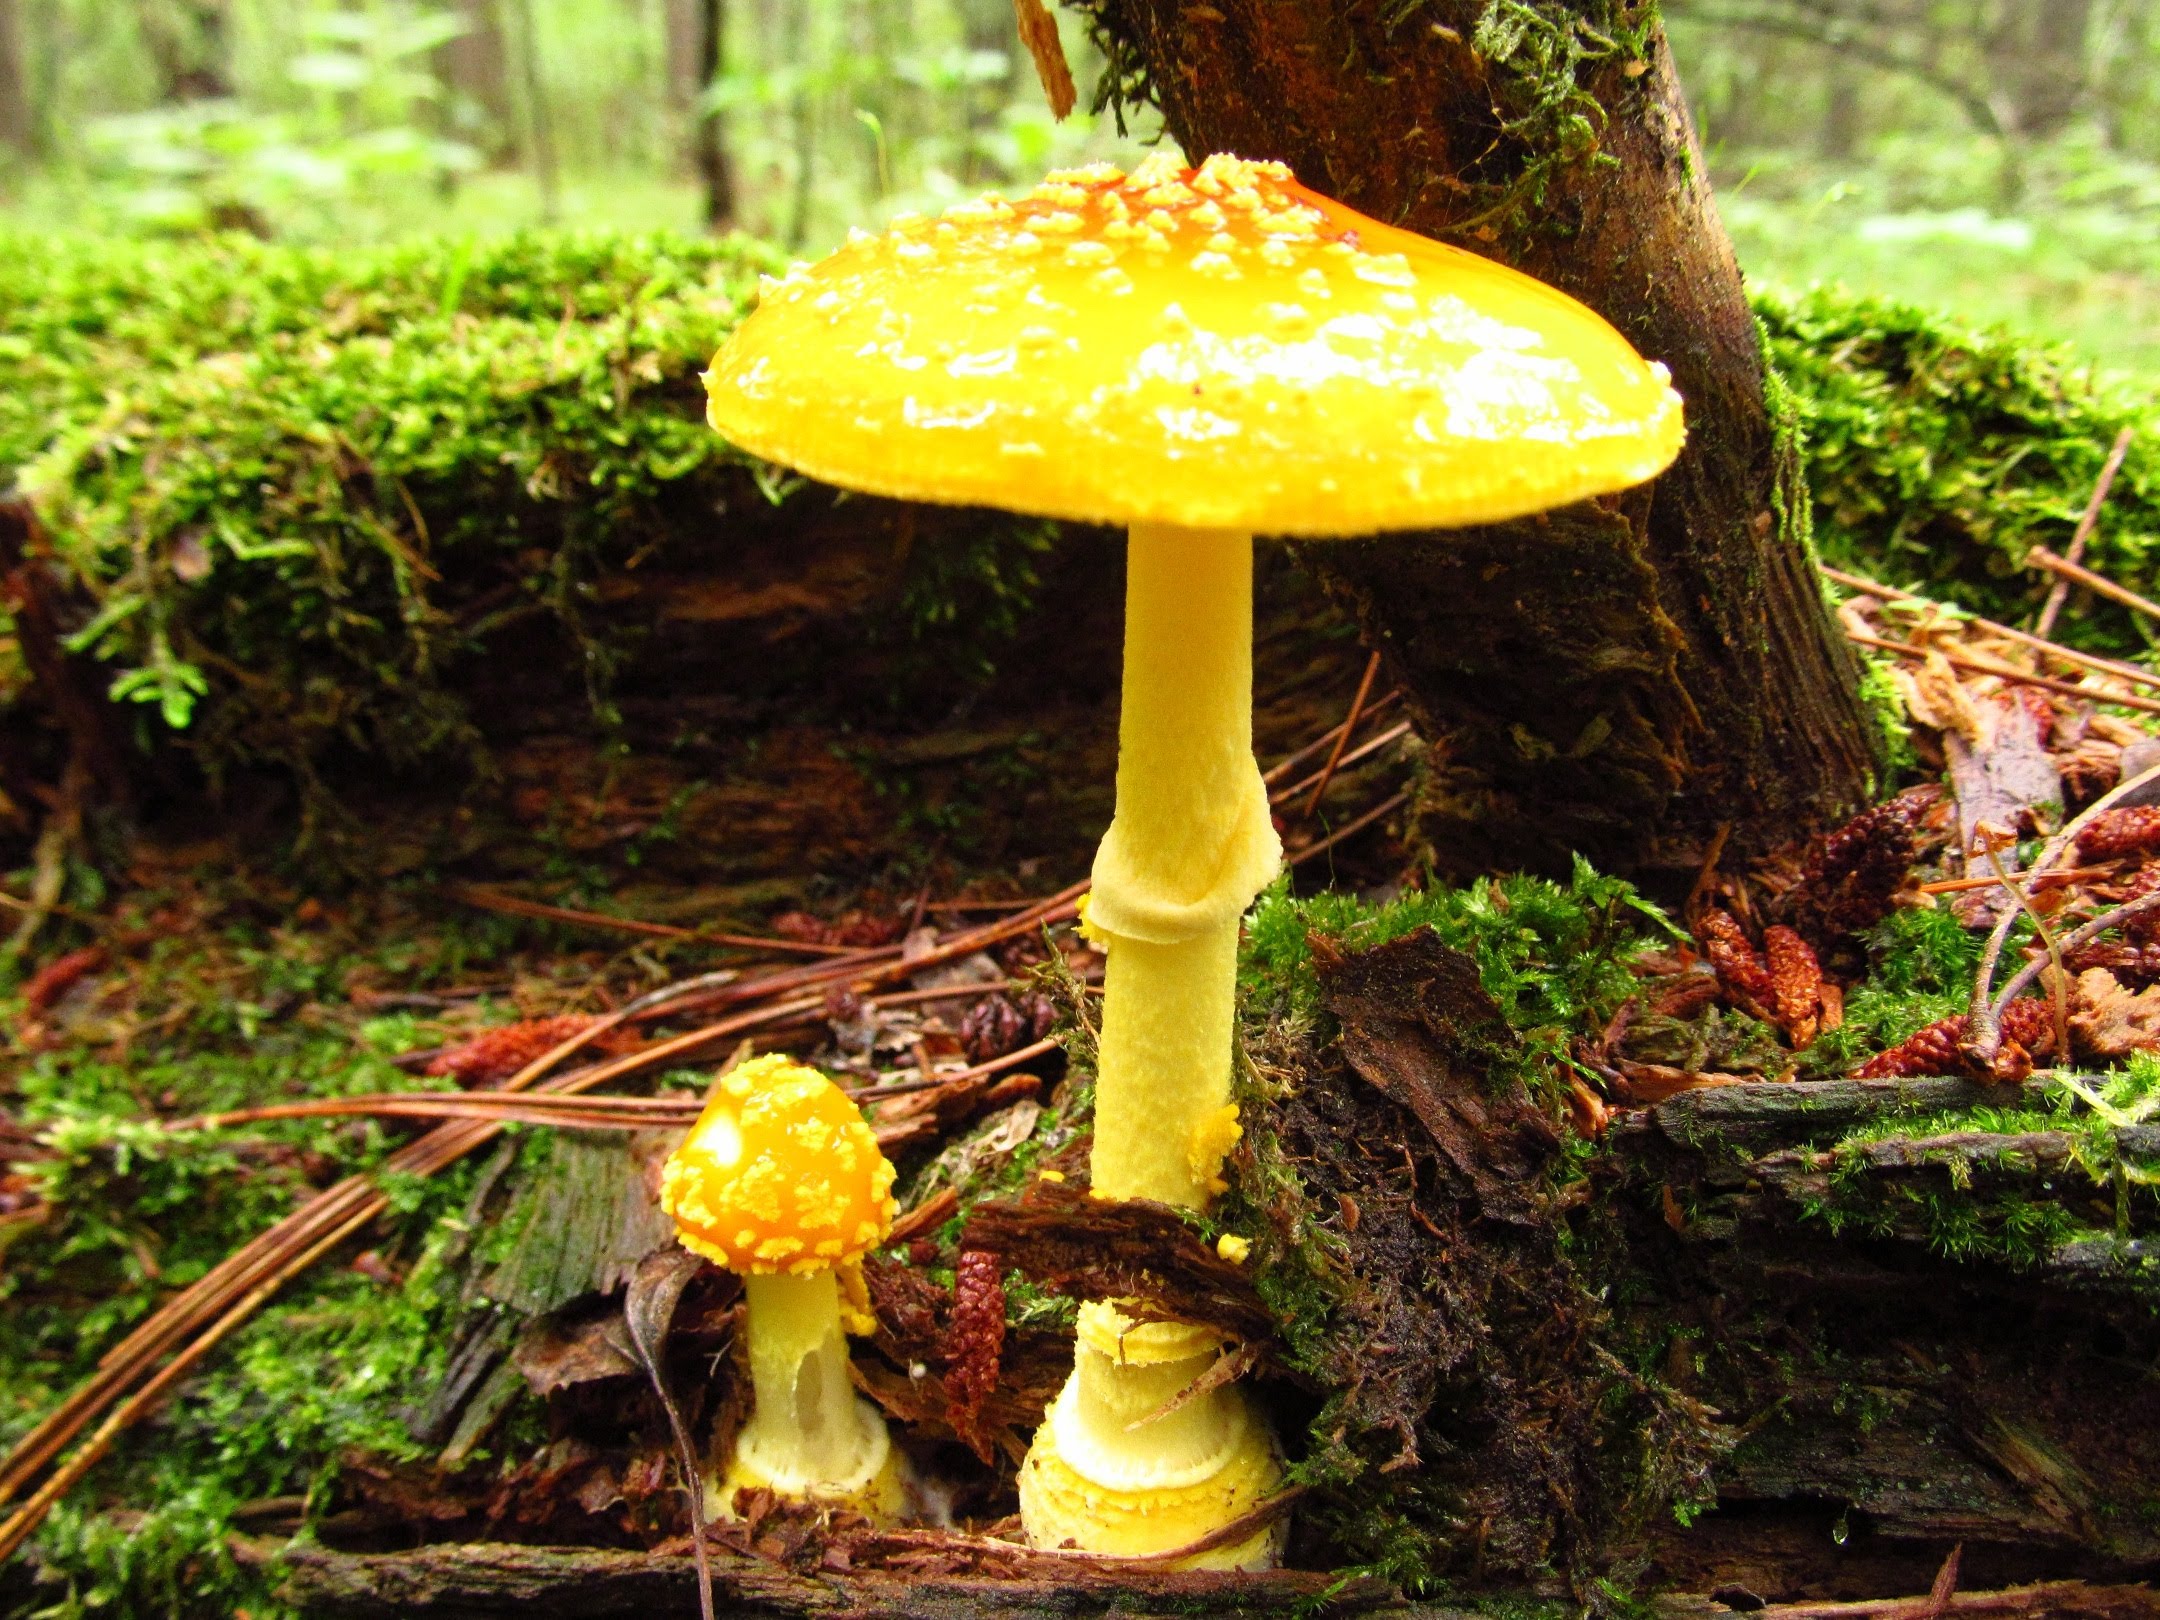 The Mikeology Store on the hunt for Wild Mushrooms of Northern ...